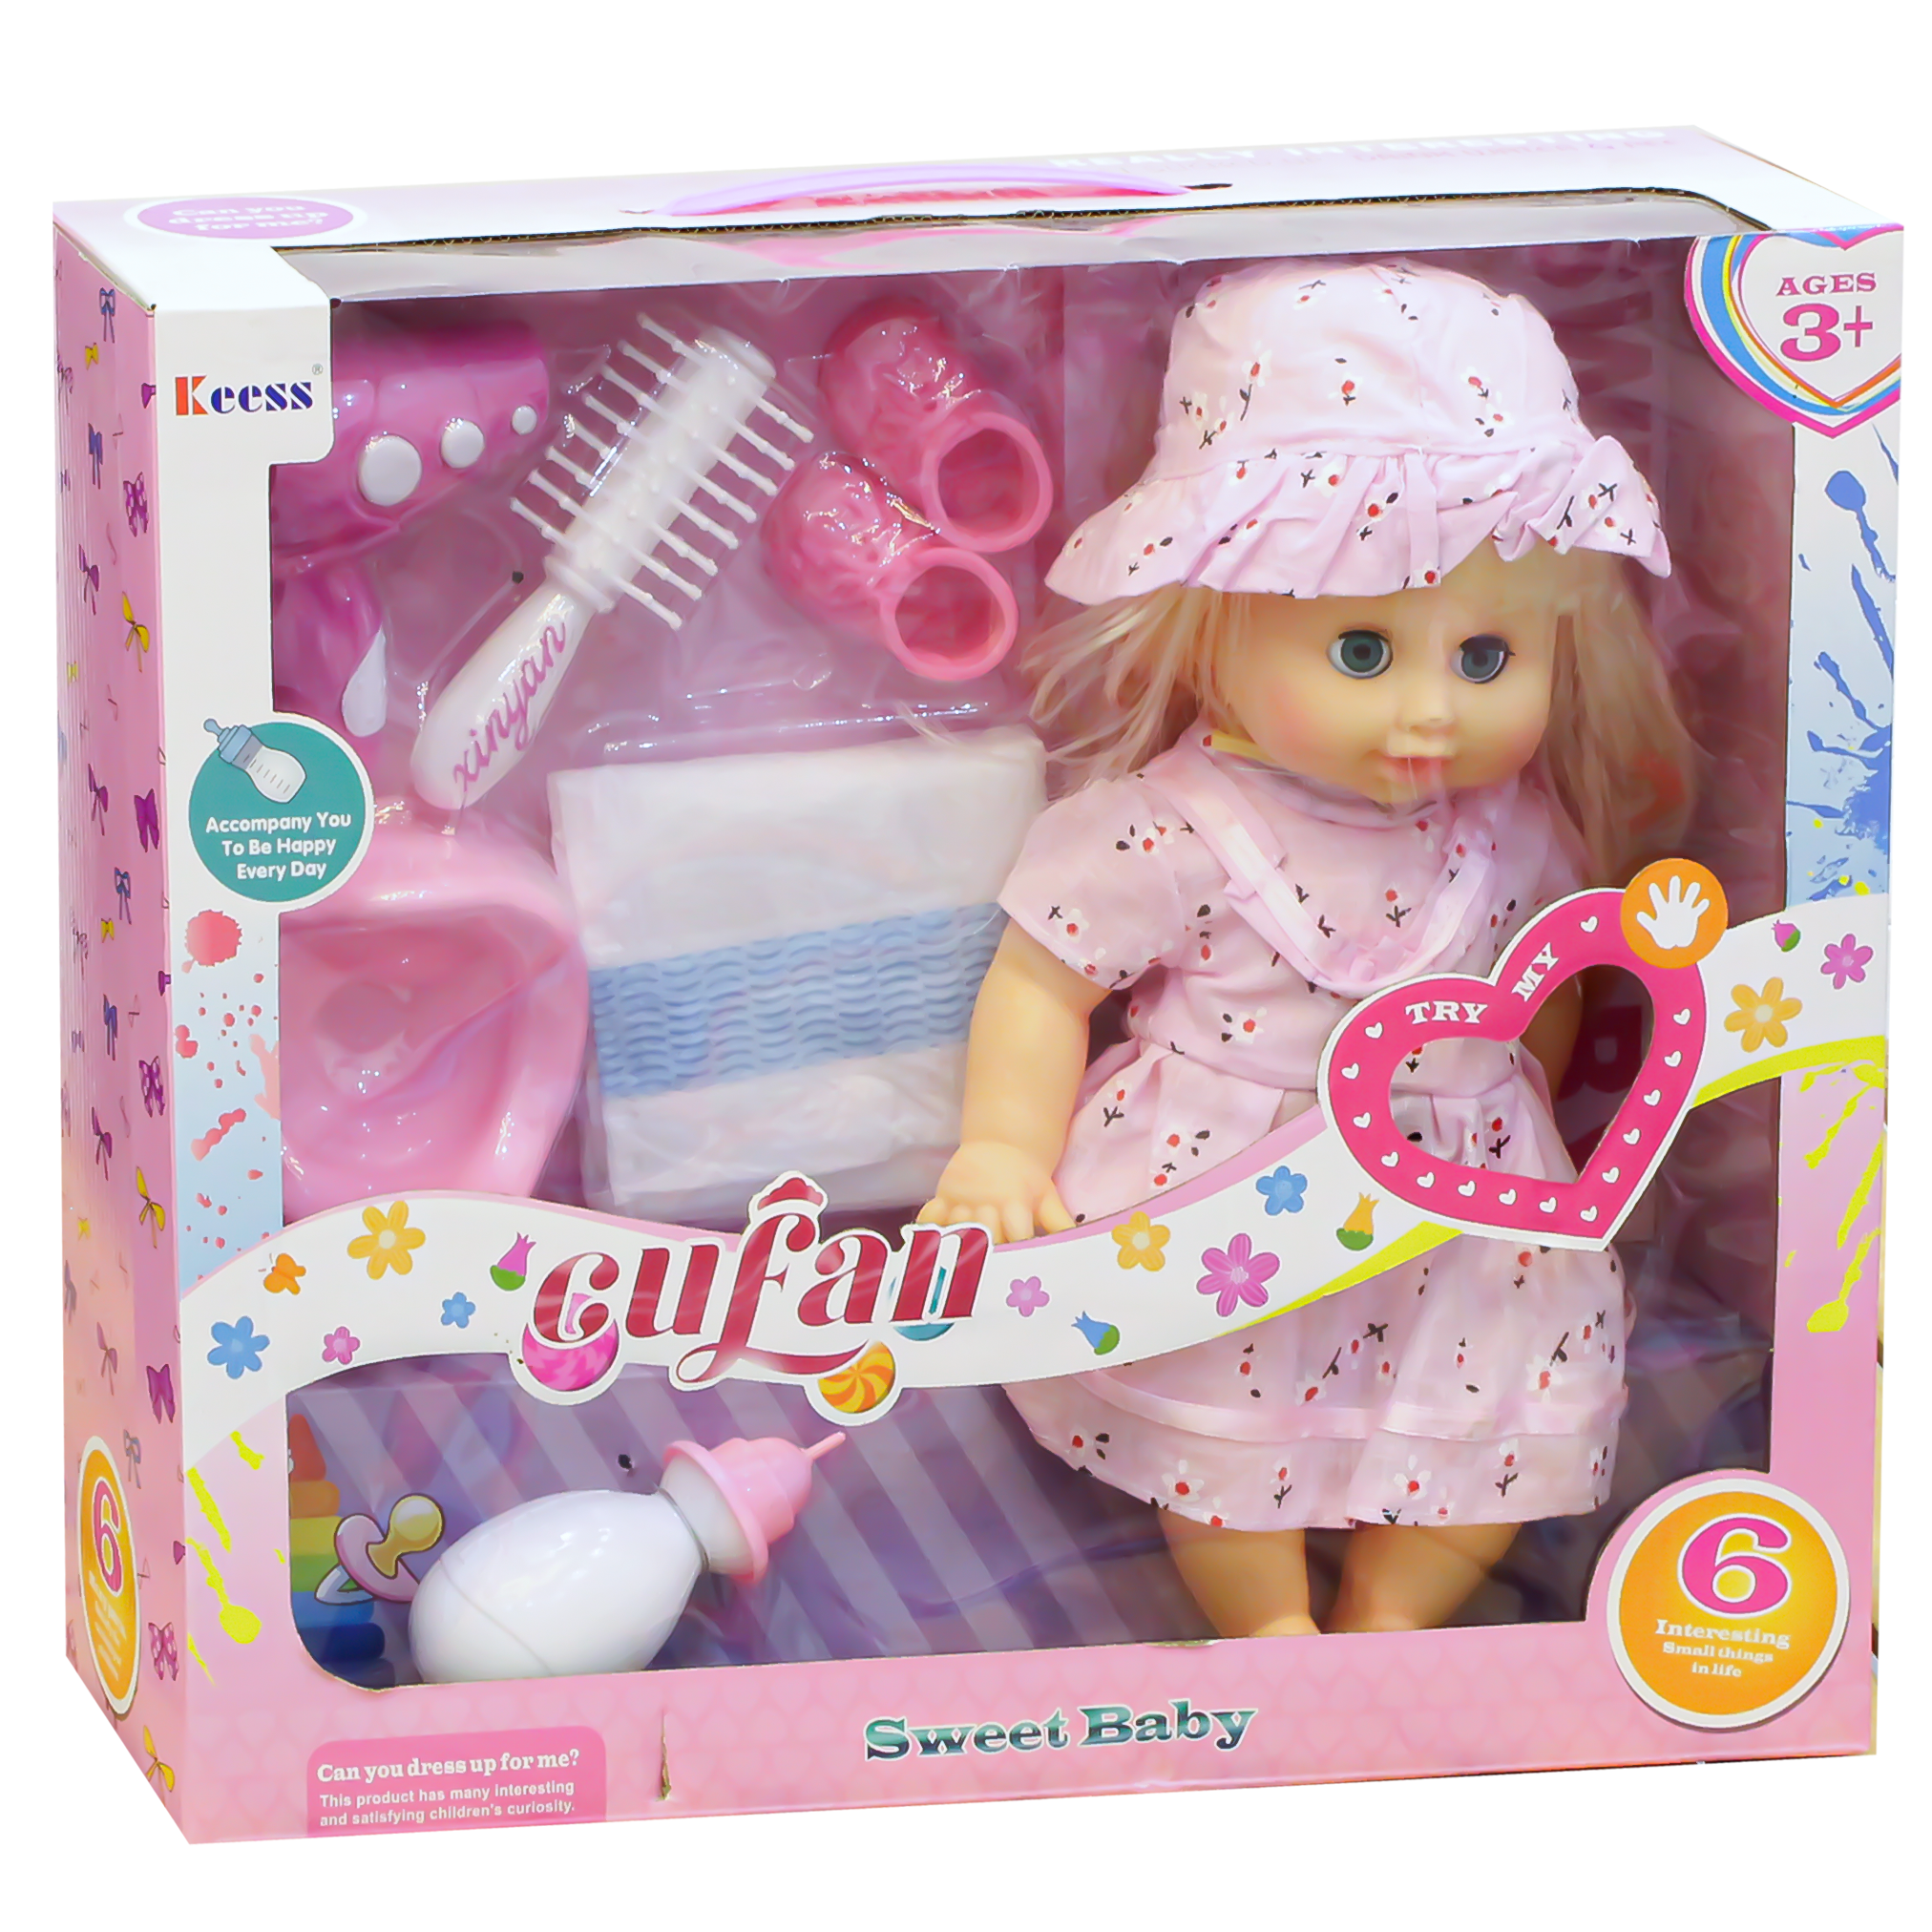 Keess Cufan sweet baby doll with accessories